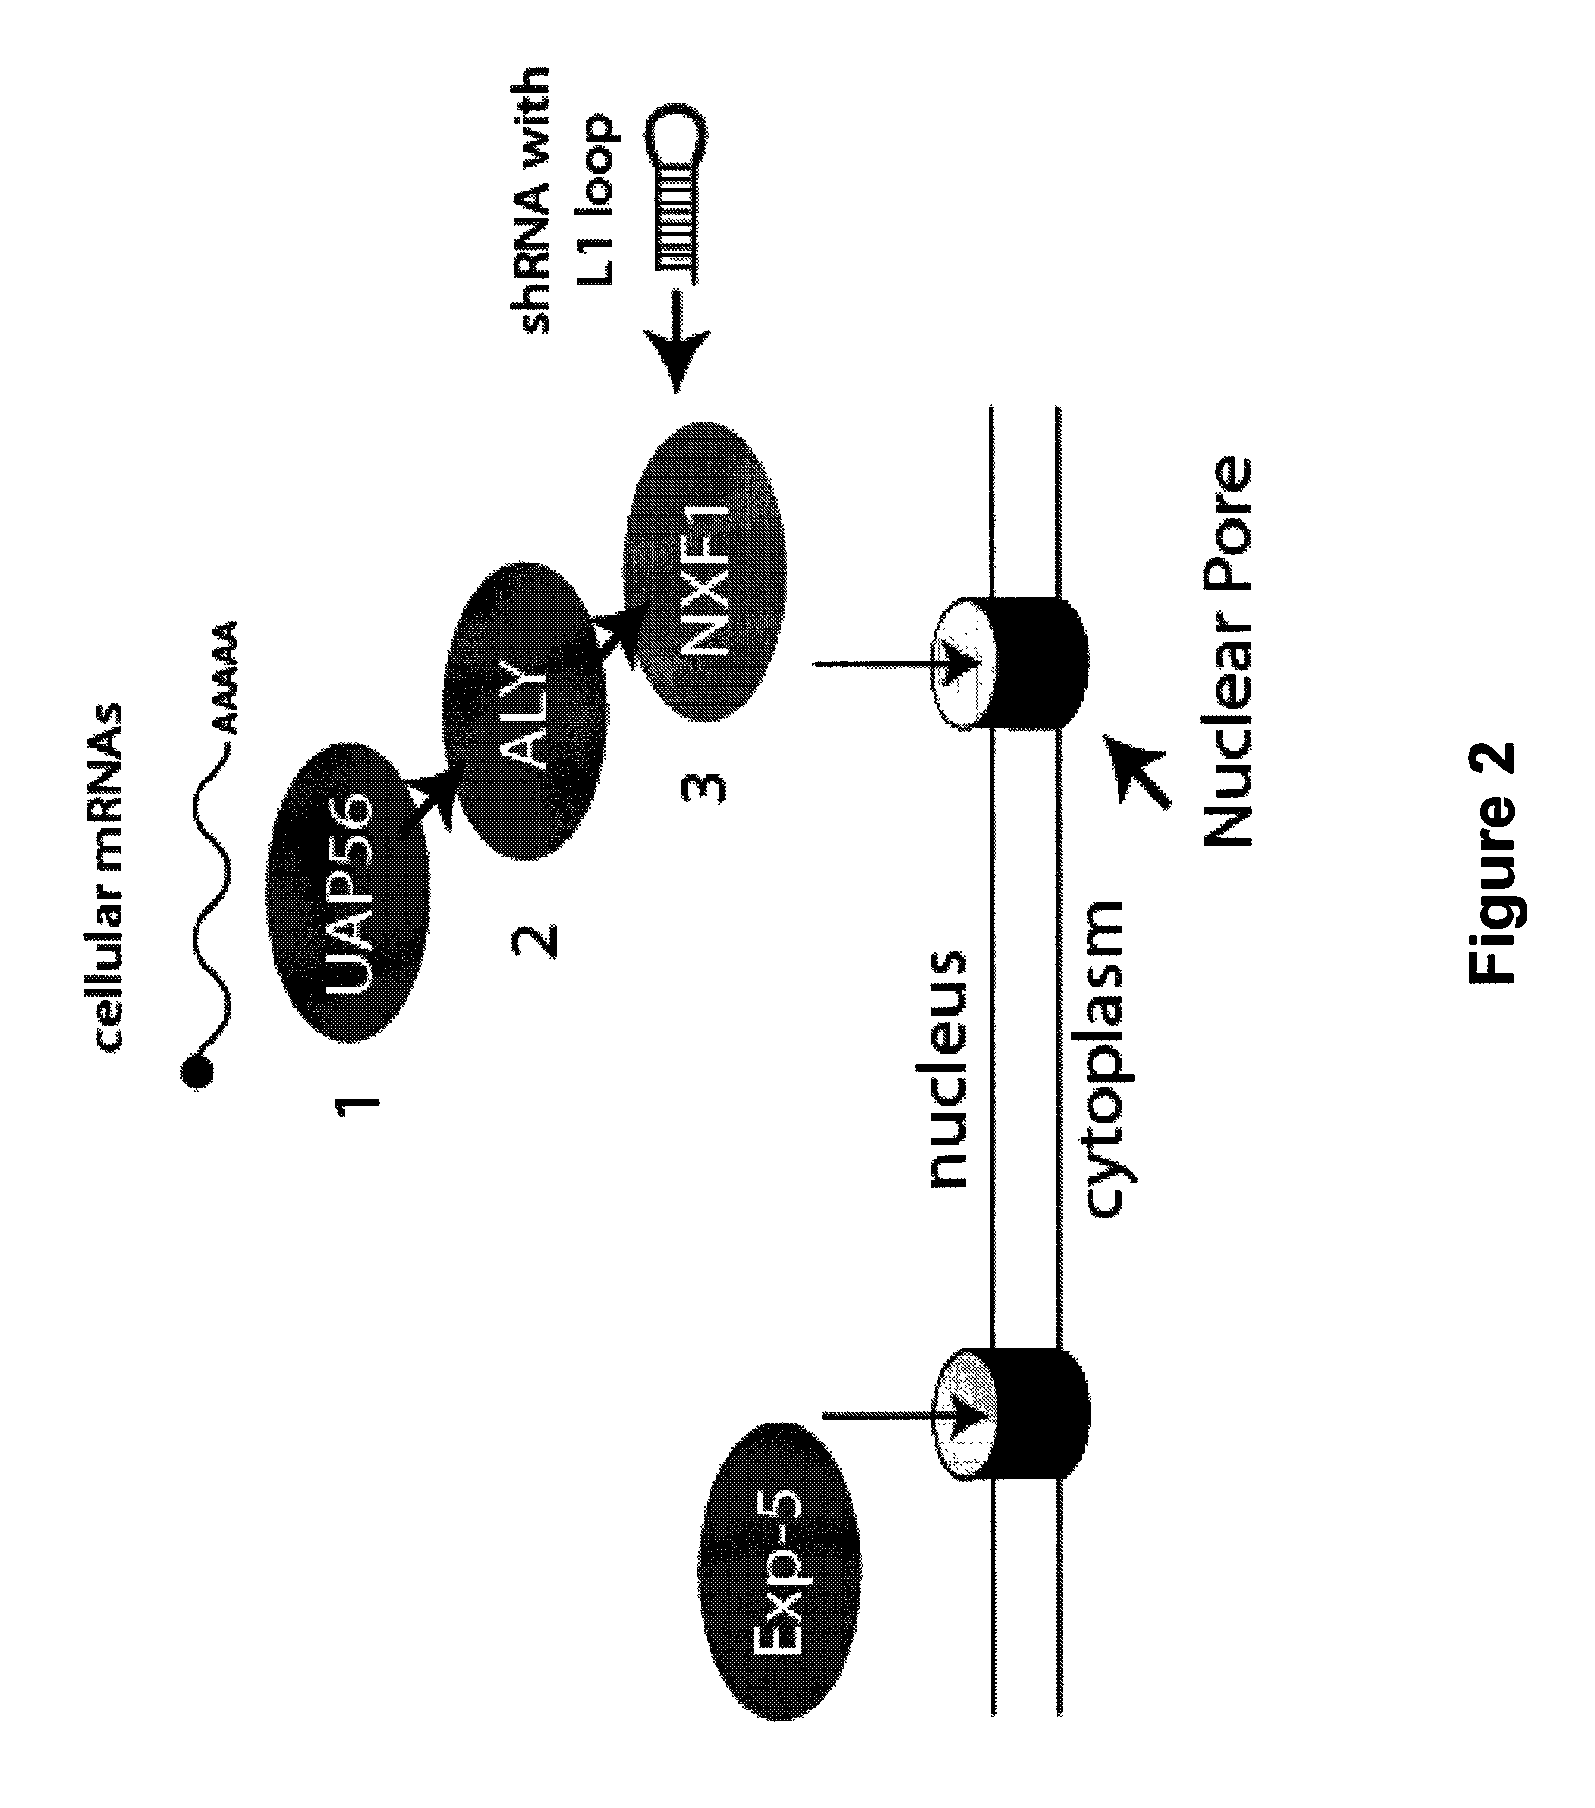 Alternative export pathways for vector expressed RNA interference